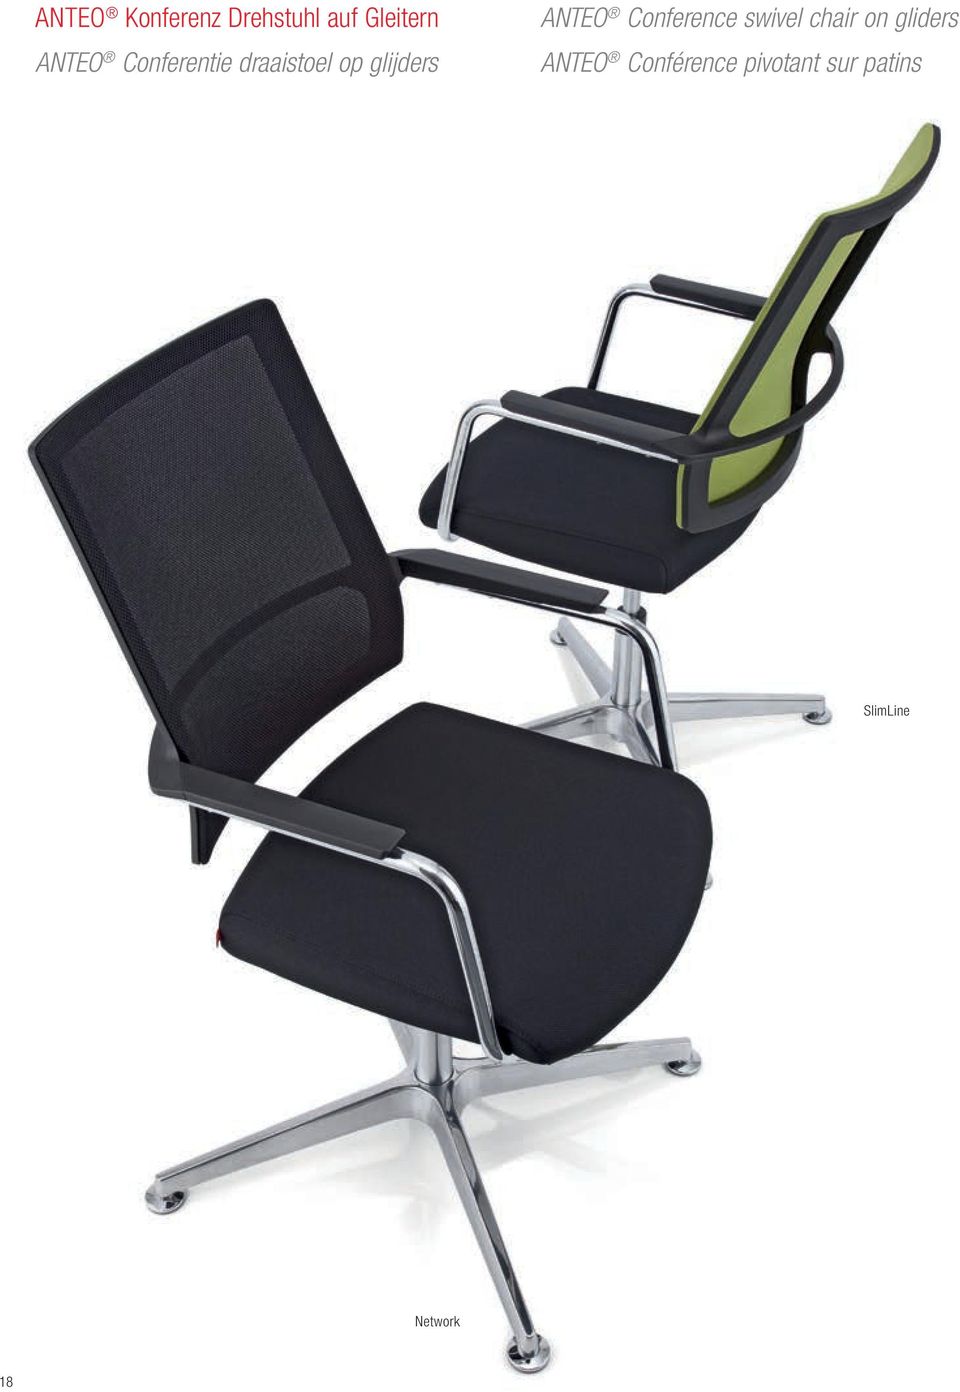 Conference swivel chair on gliders ANTEO